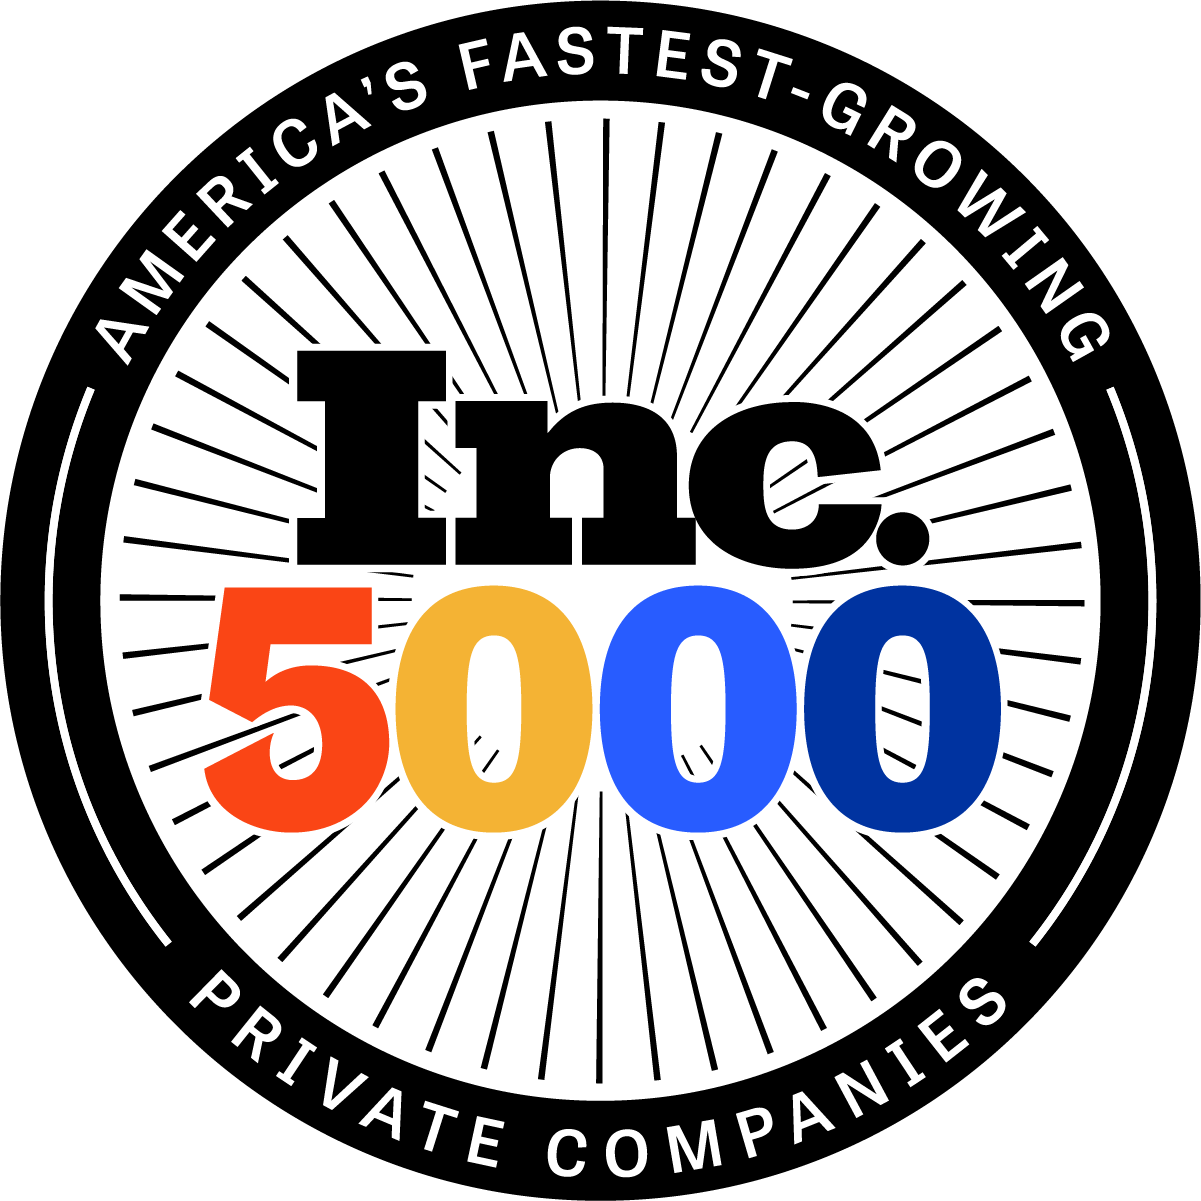 RFPIO has been recognized by Inc. Magazine in its annual Inc. 5000 list, coming in at No. 281 out of 5,000 independent businesses.